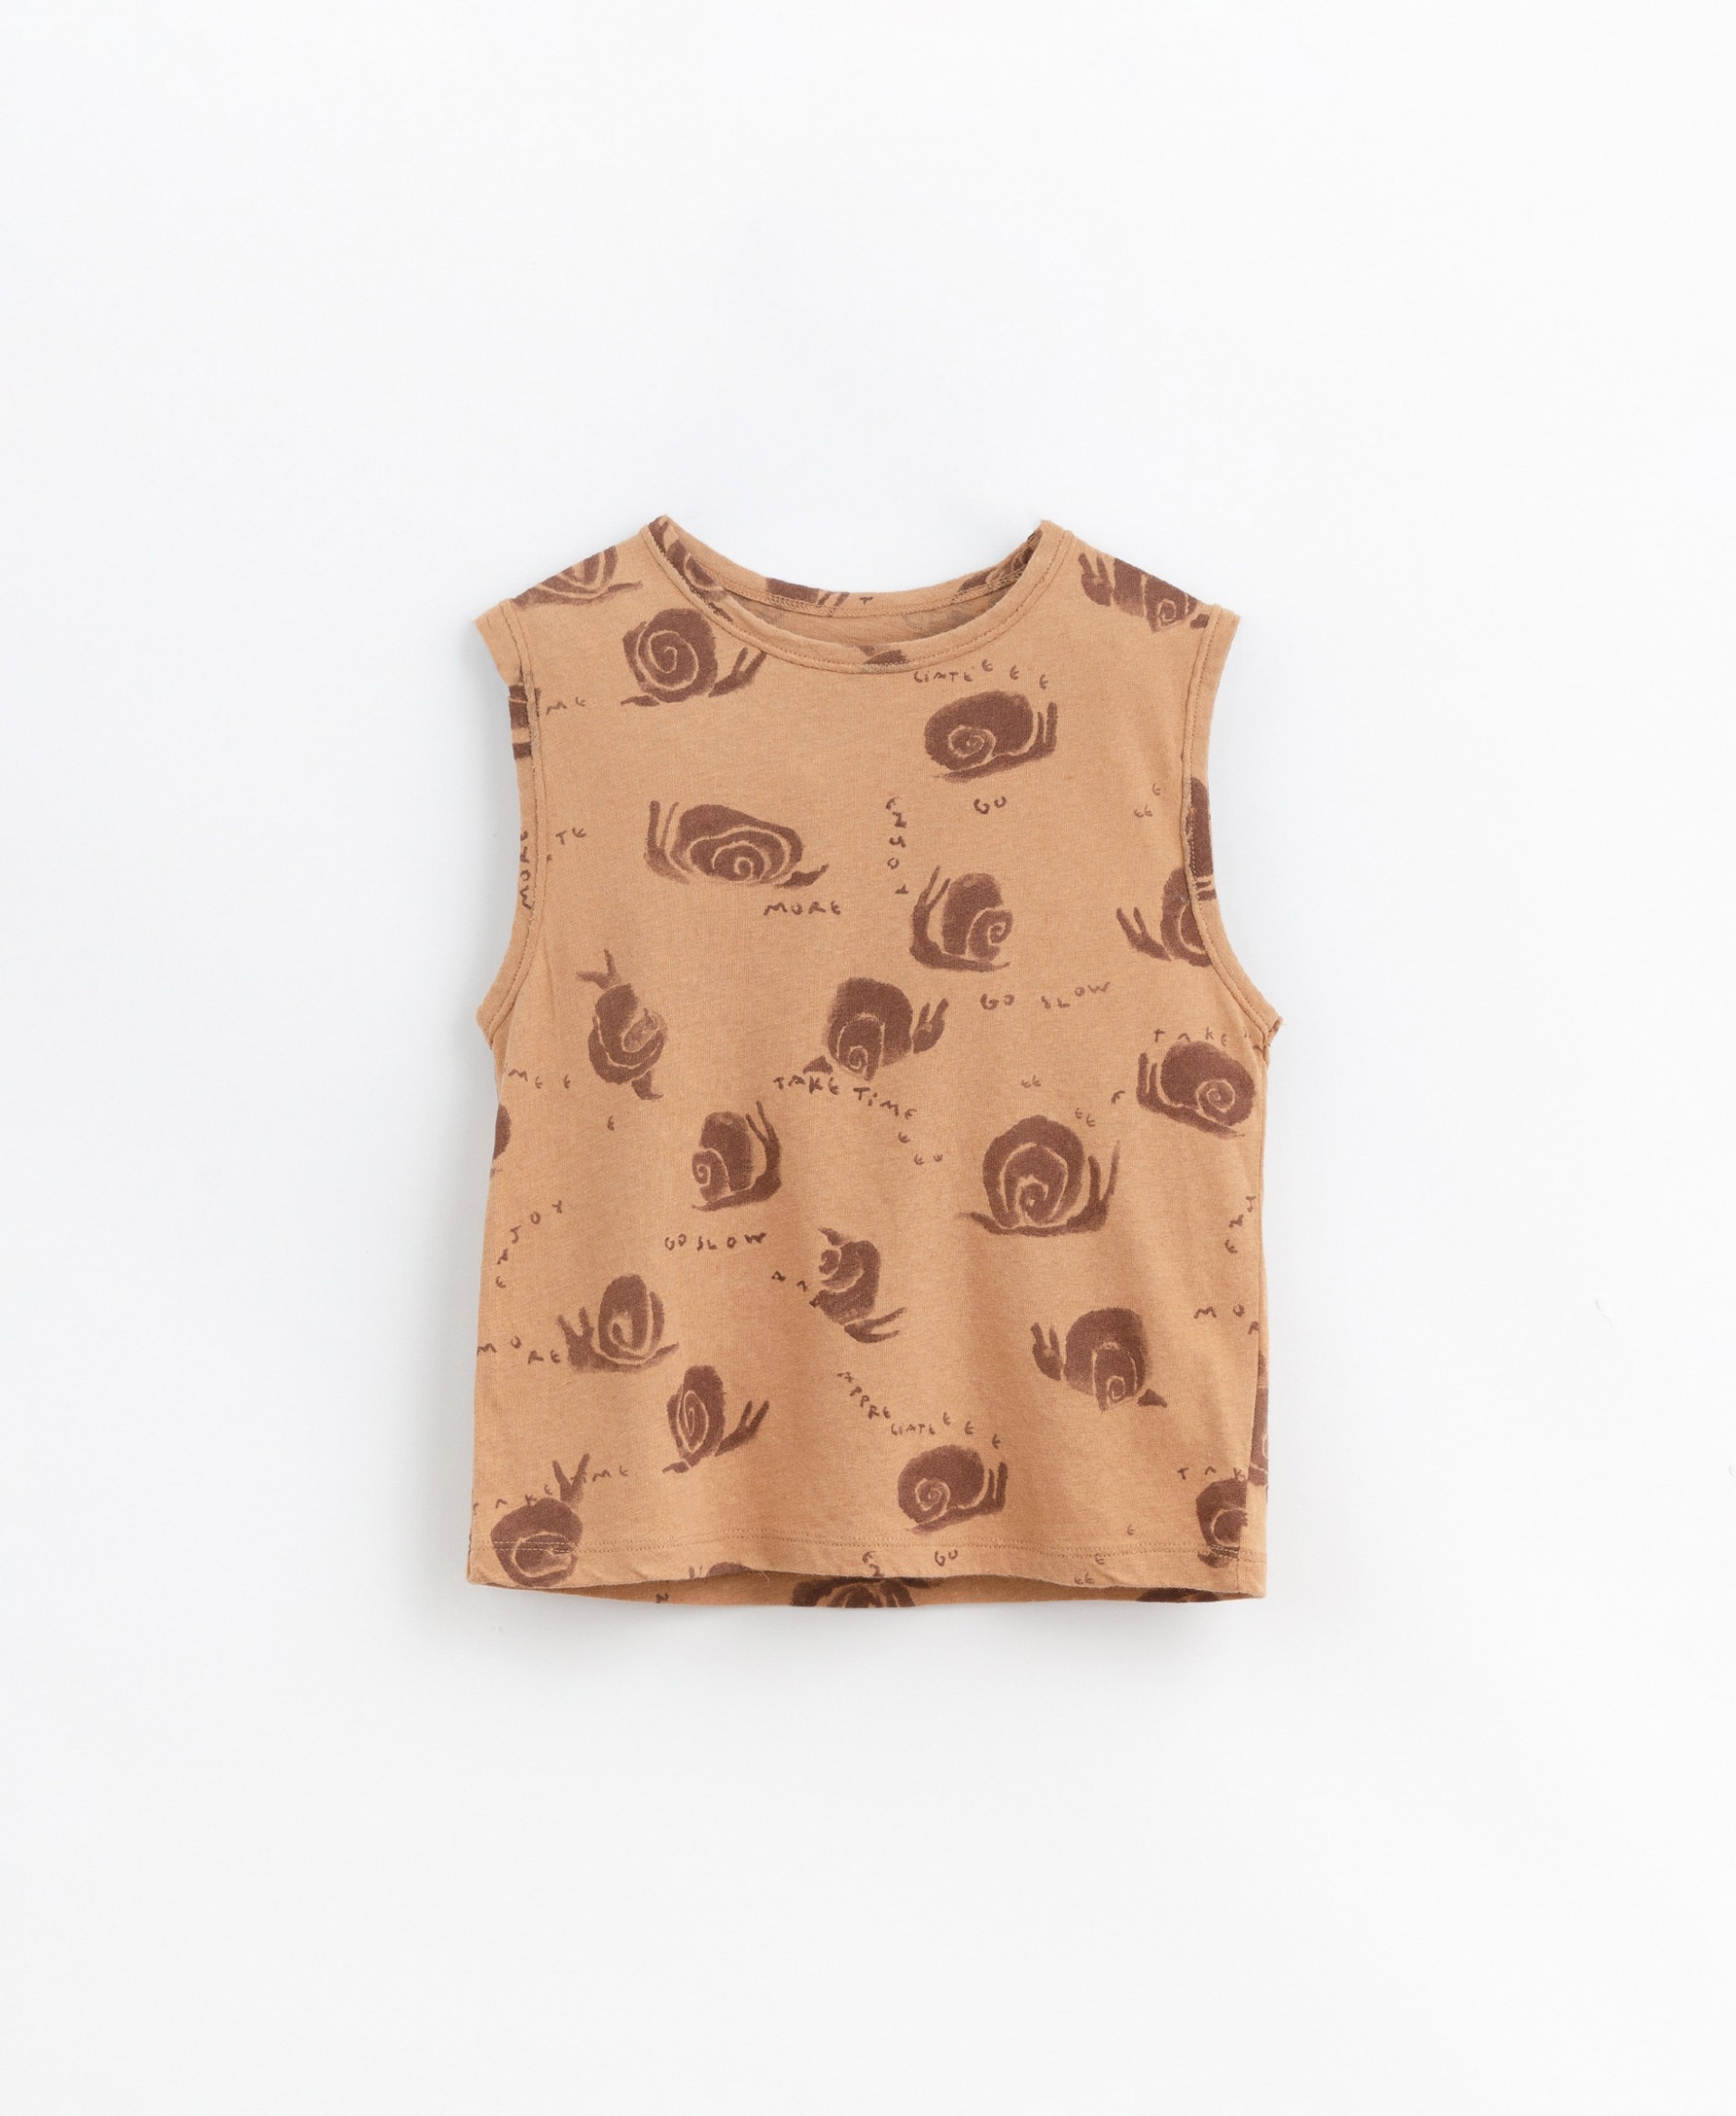 Sleeve-less t-shirt with snail print | Basketry